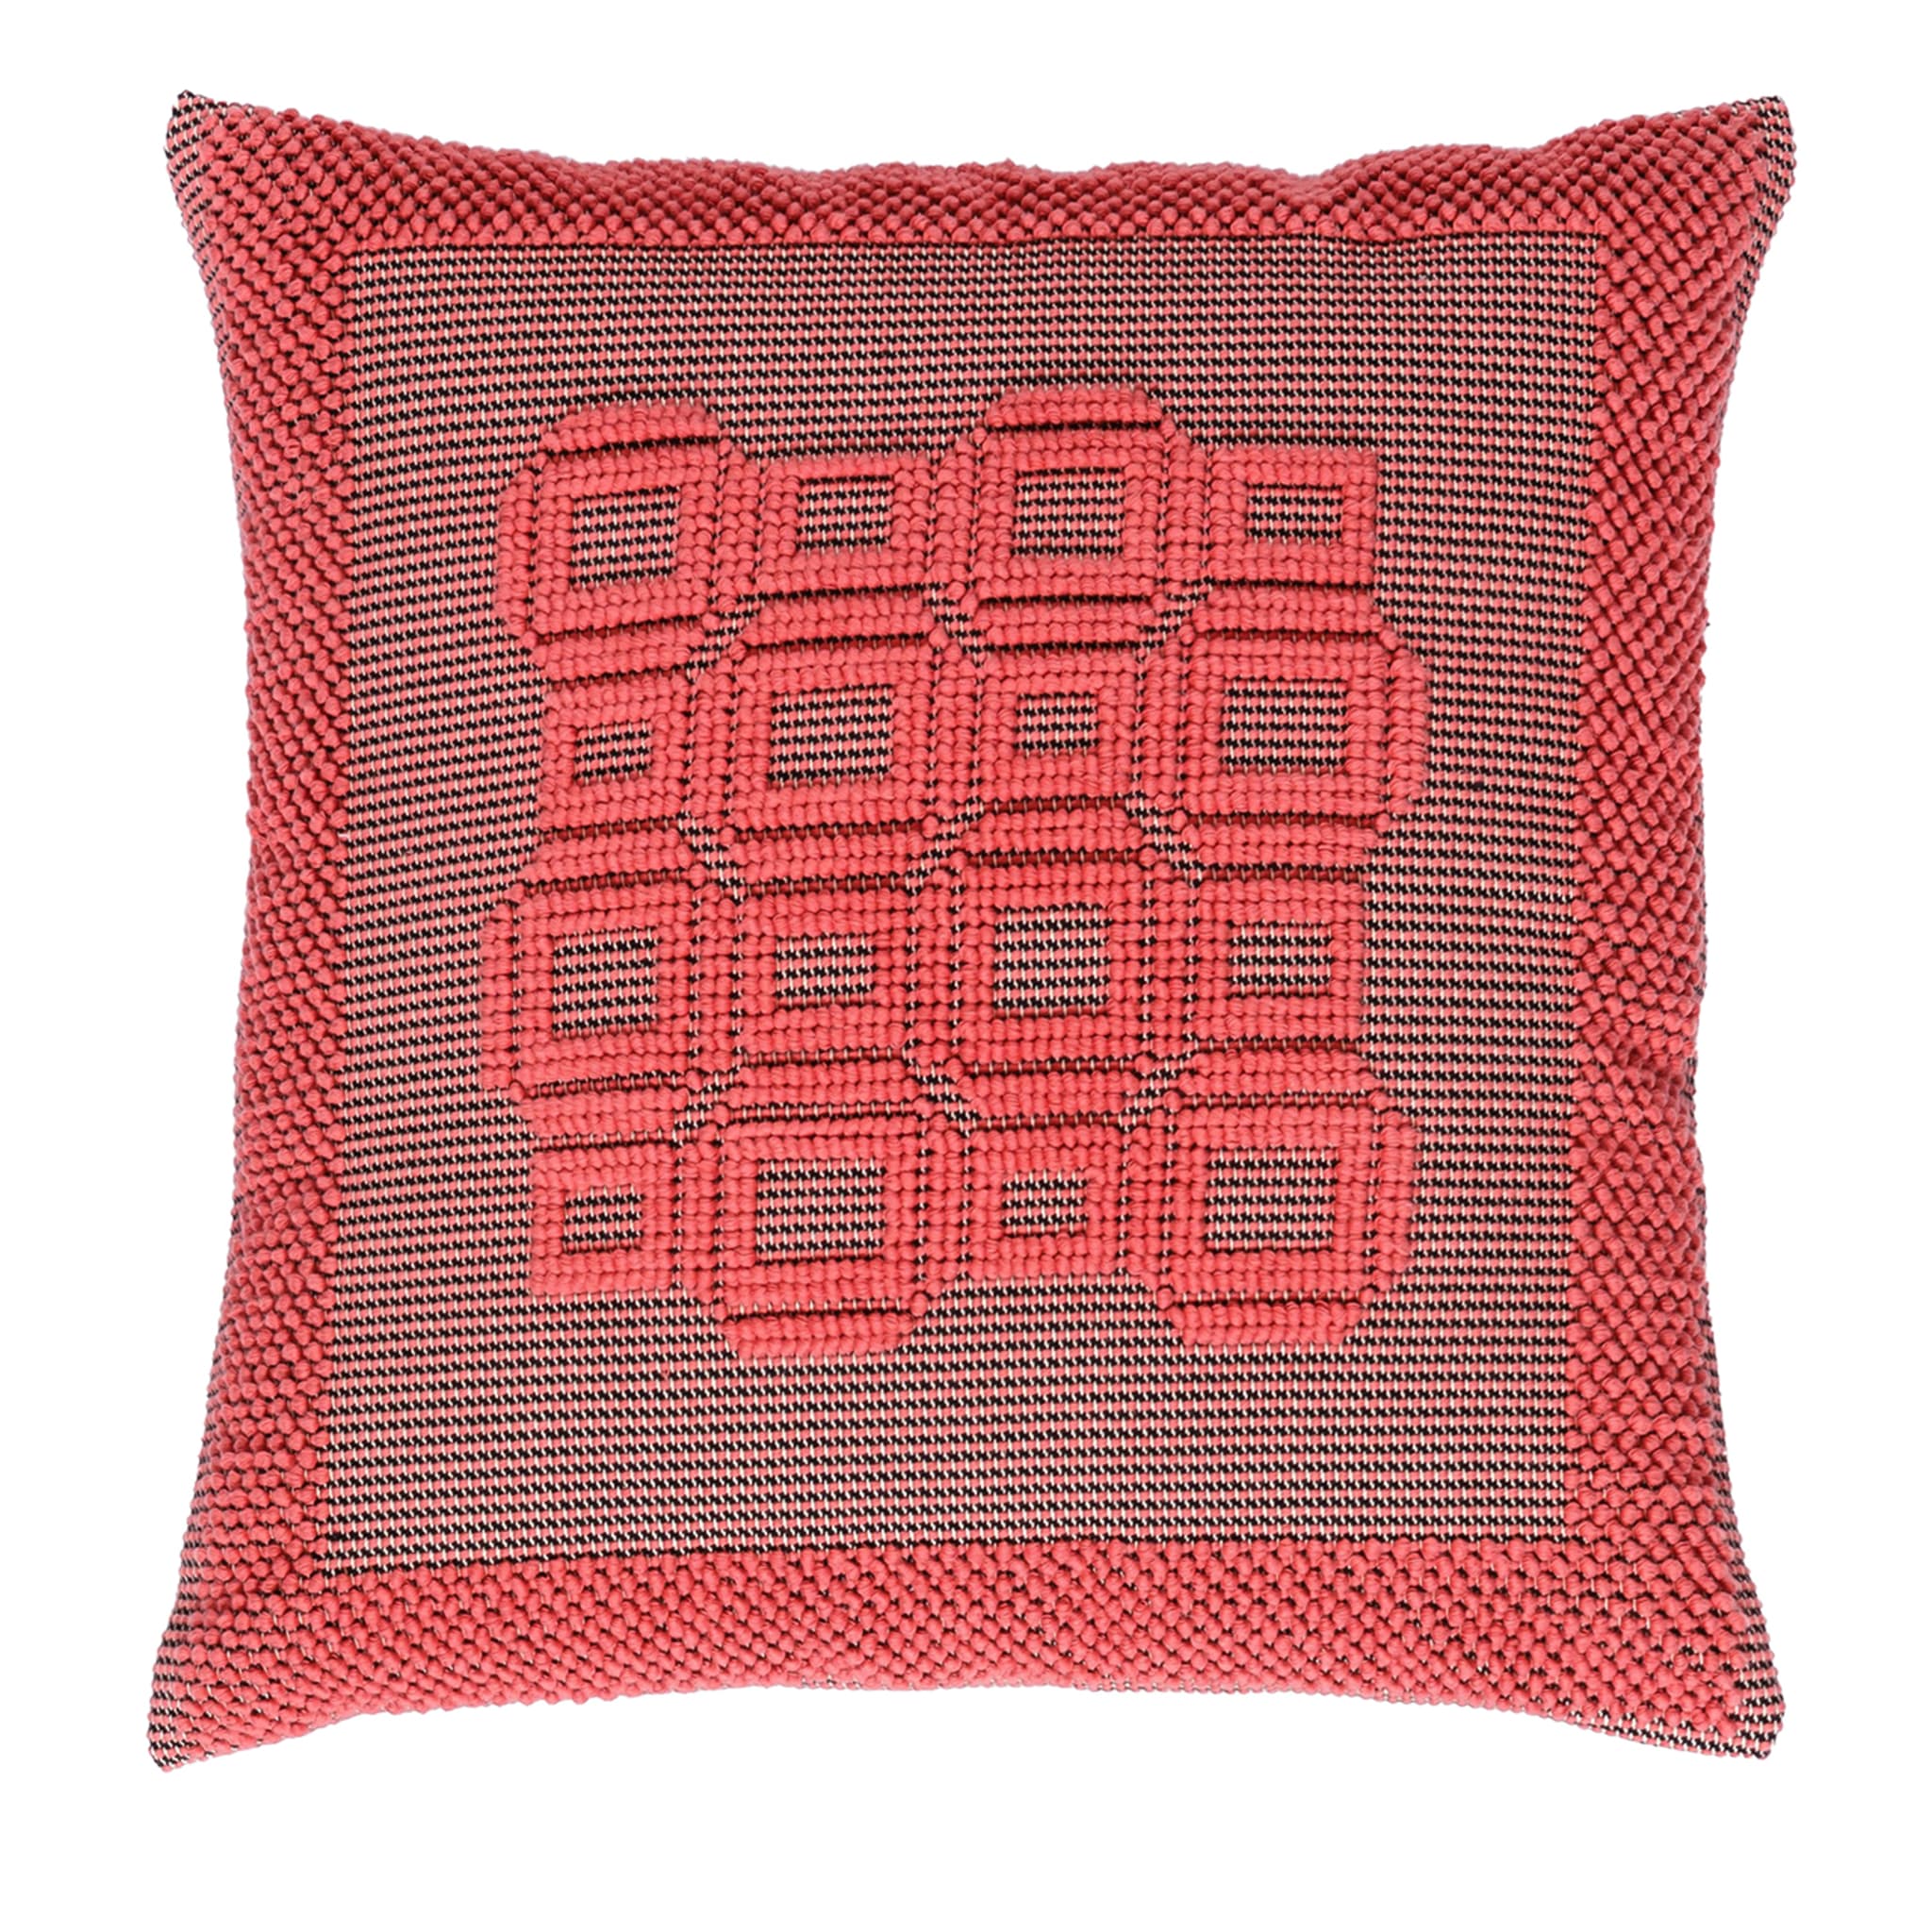 Corallo Red and Black Cushion - Main view